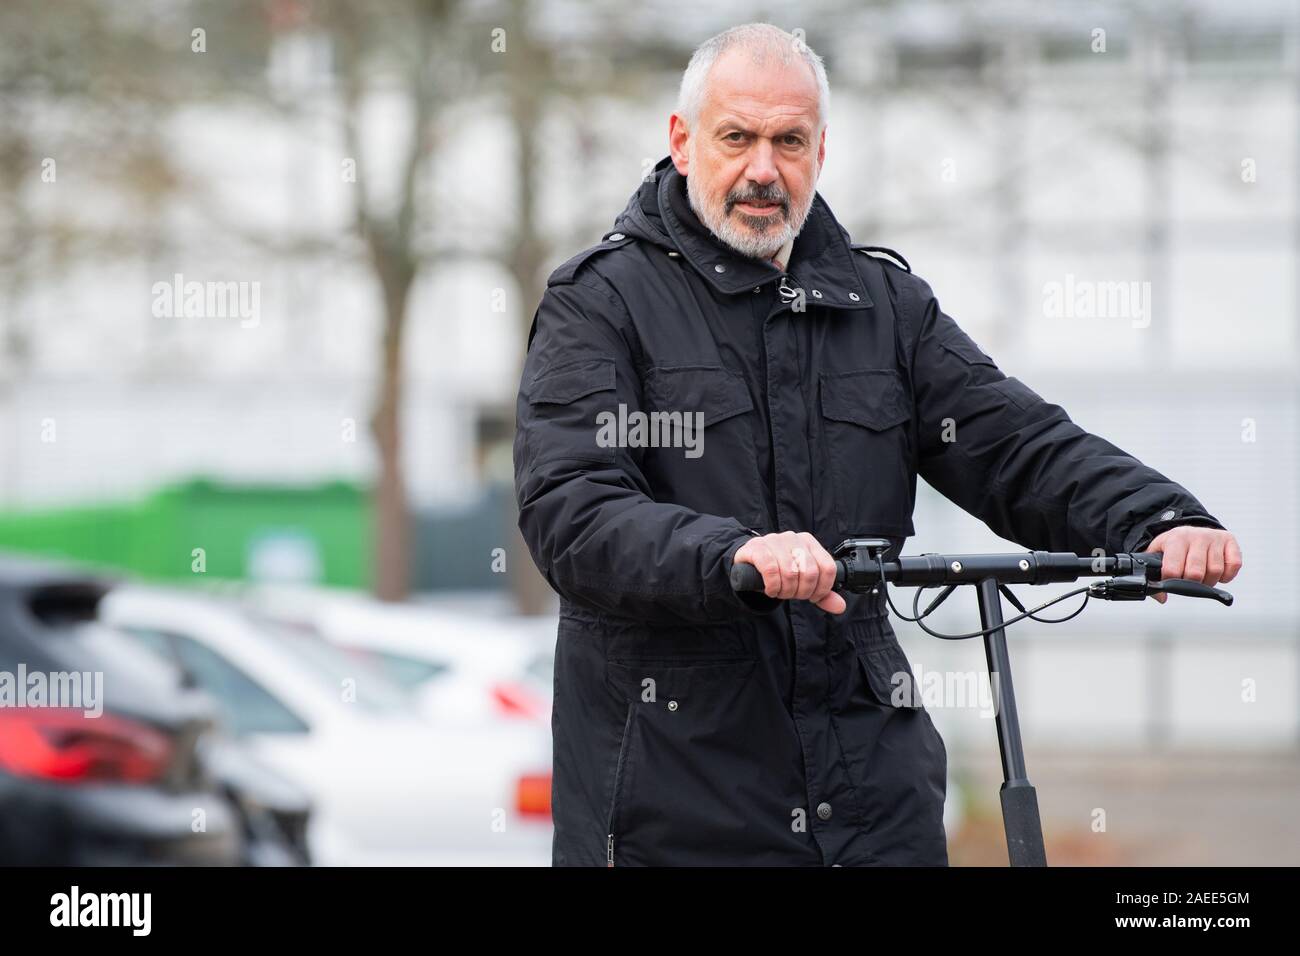 Stuttgart, Germany. 22nd Nov, 2019. Manfred Wacker, deputy head of the  Chair of Traffic Planning and Traffic Control Technology at the University  of Stuttgart, is standing on a parking lot with a